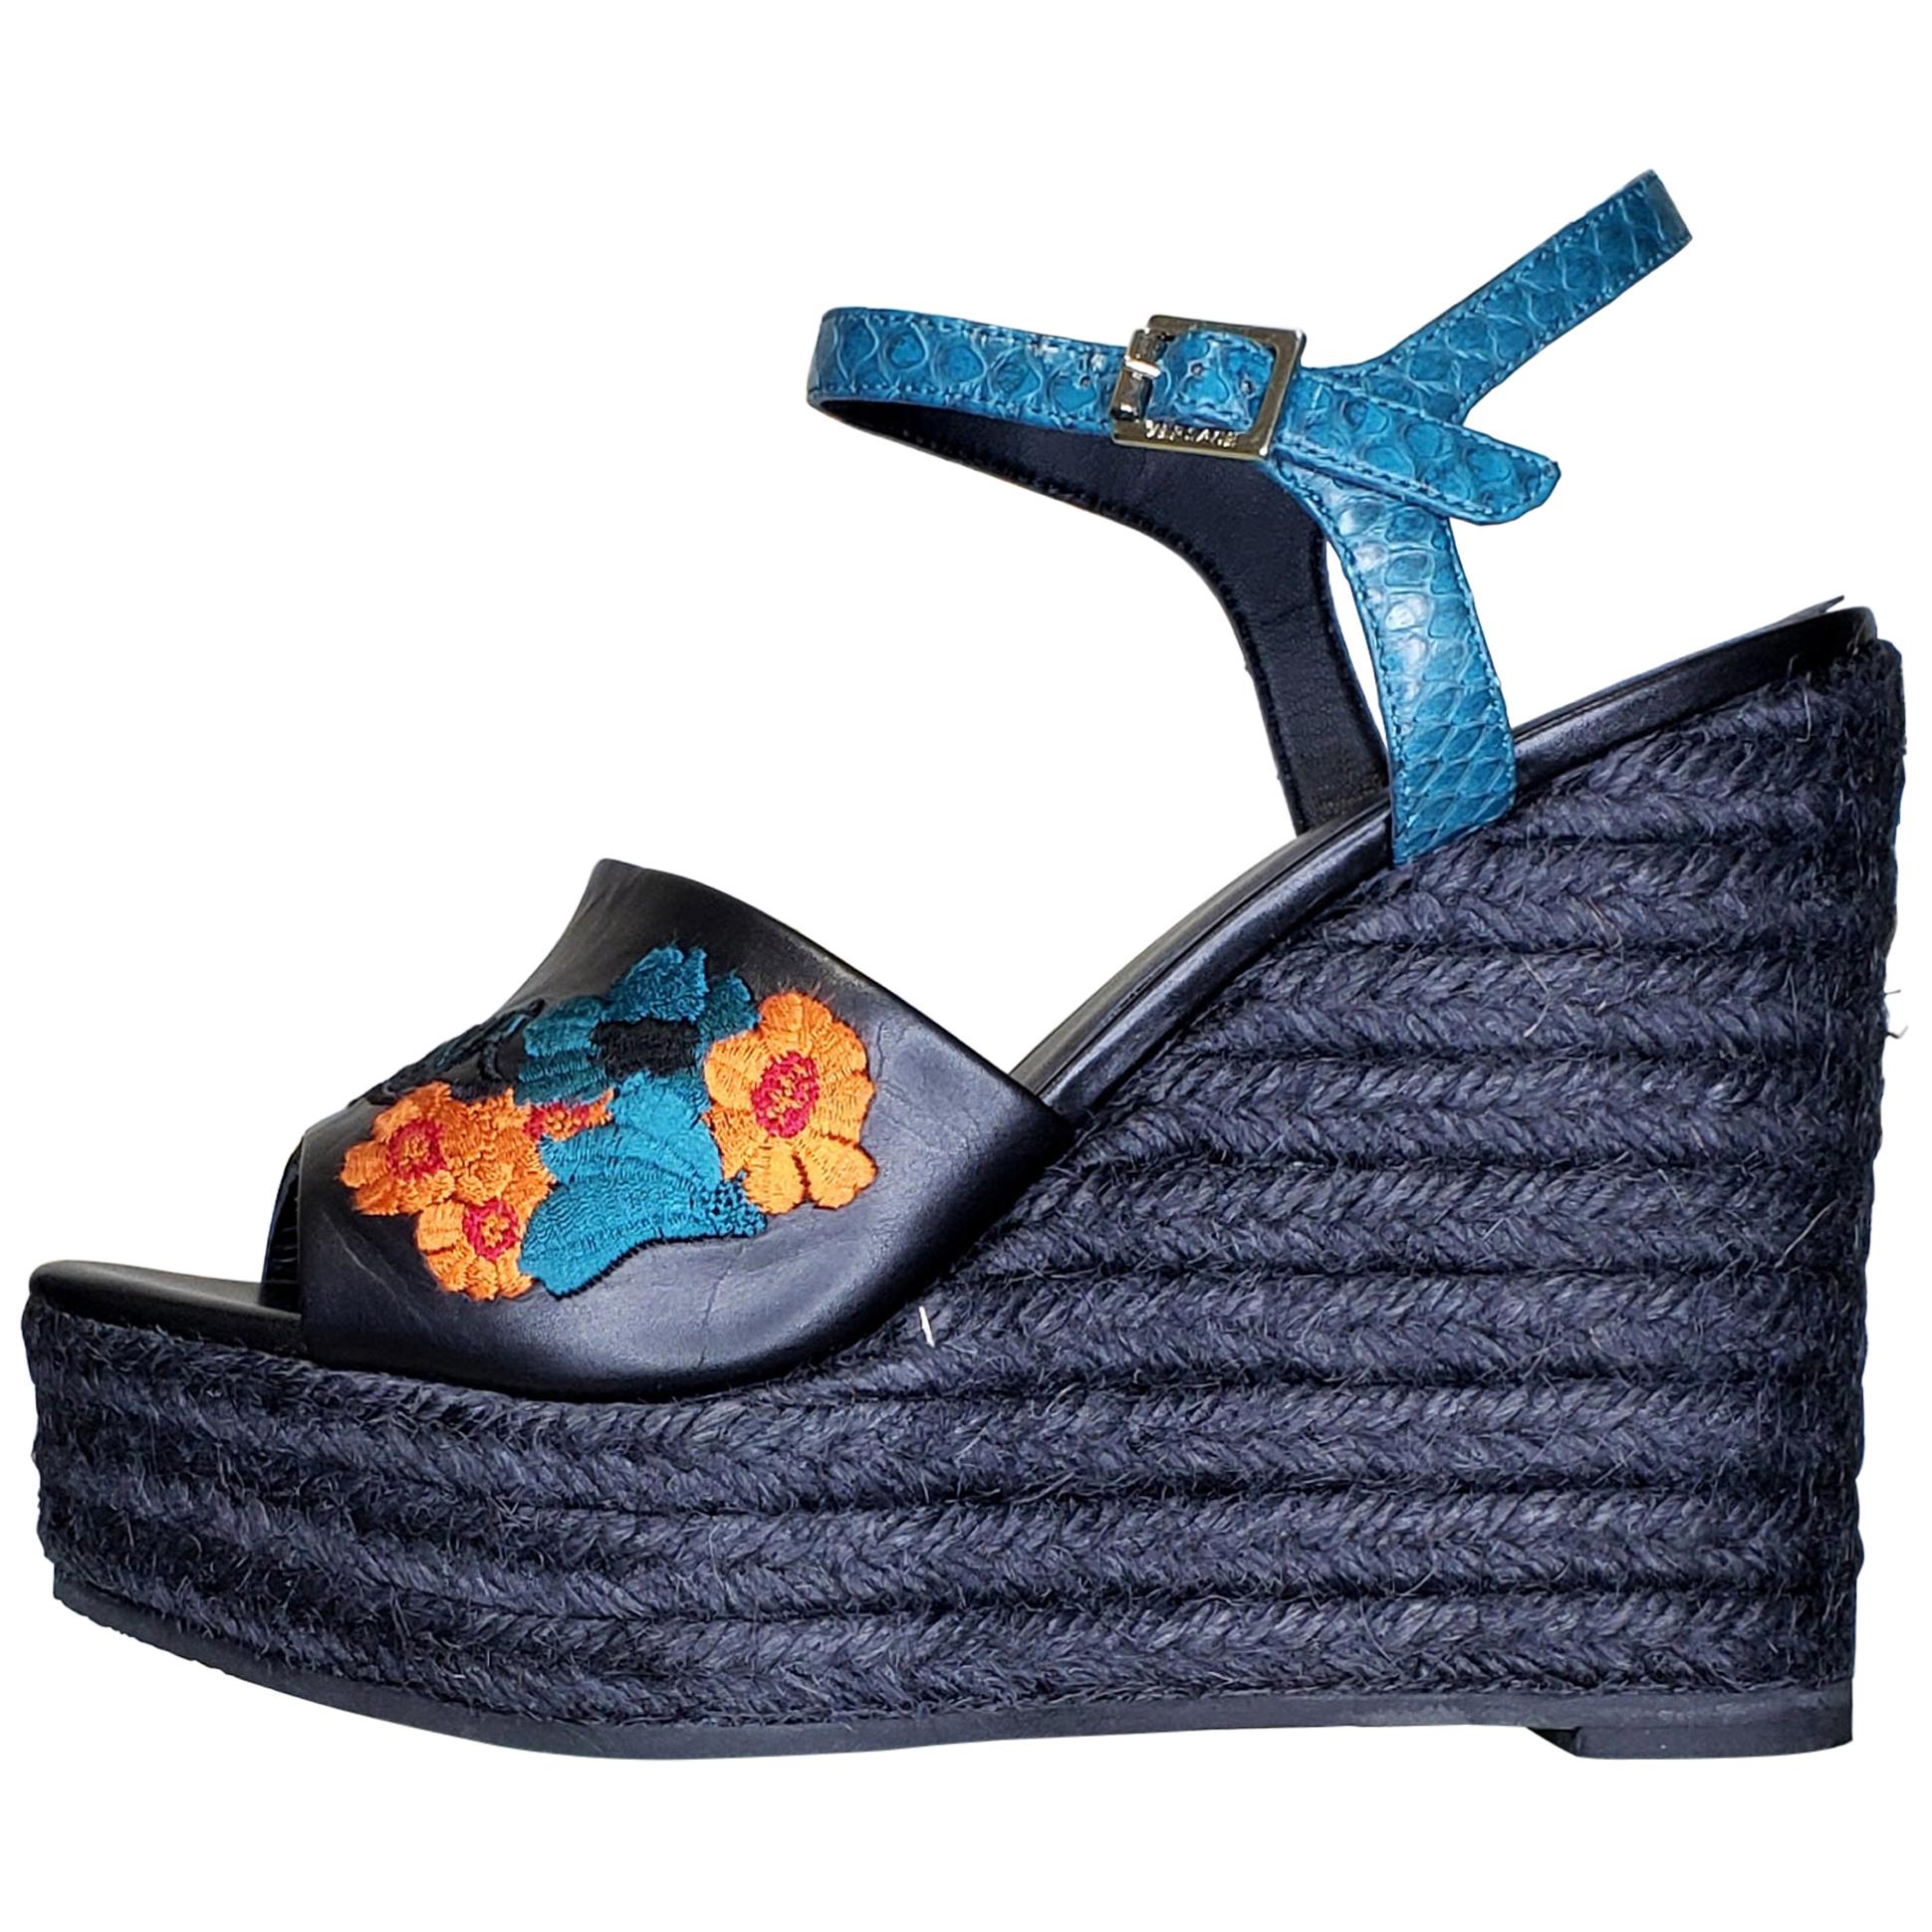 VERSACE BLACK LEATHER and FLORAL EMBROIDERED WEDGE SANDALS 38.5, 39